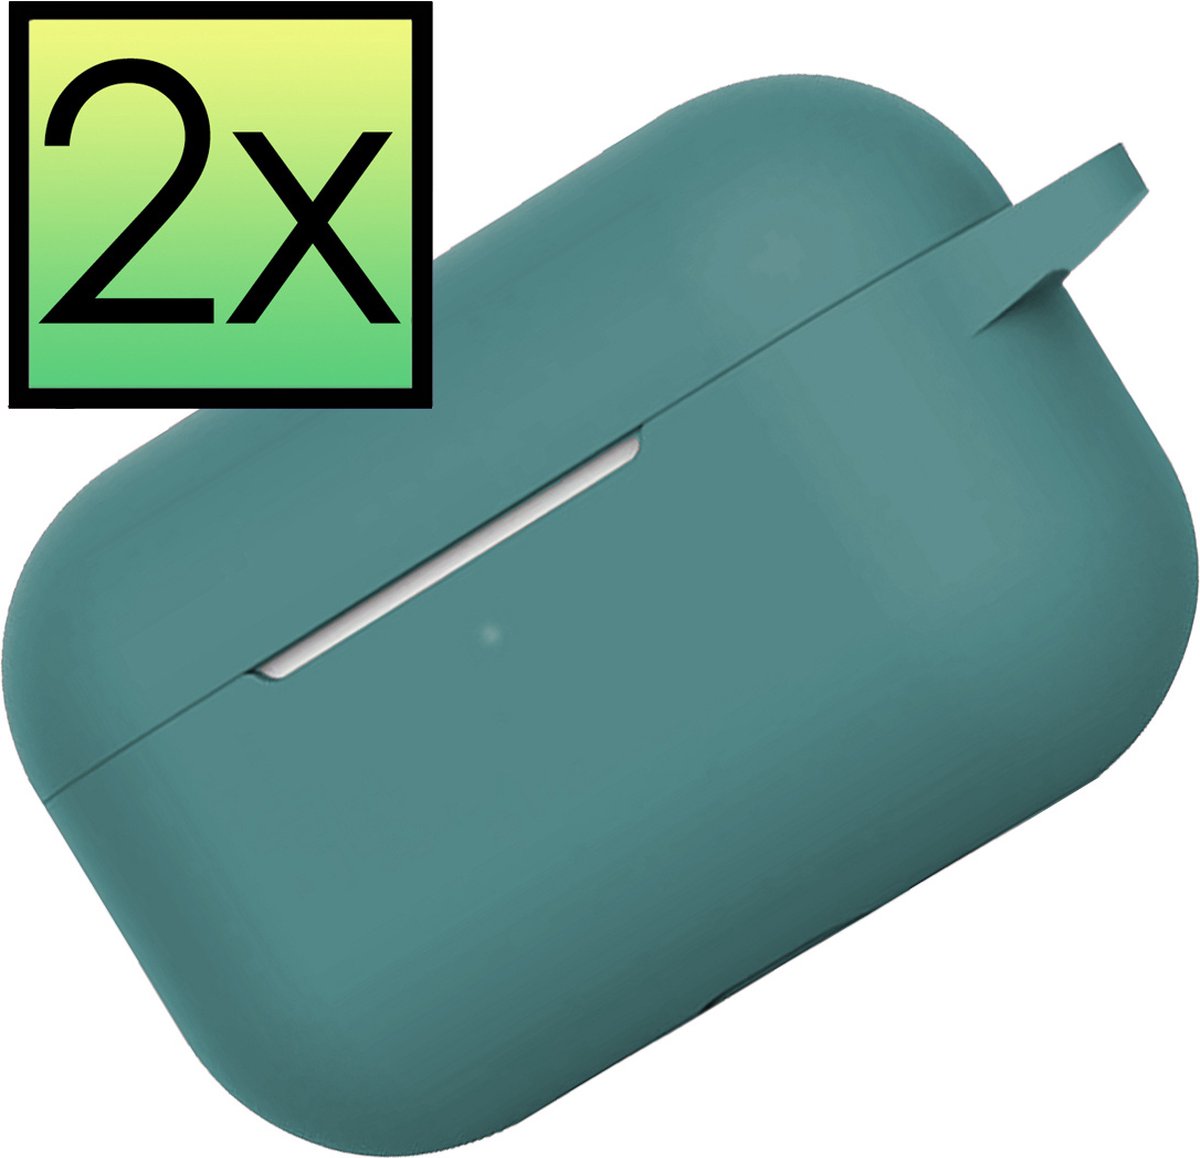 Hoes Geschikt voor AirPods Pro 2 Hoesje Cover Silicone Case Hoes - Donkergroen - 2x